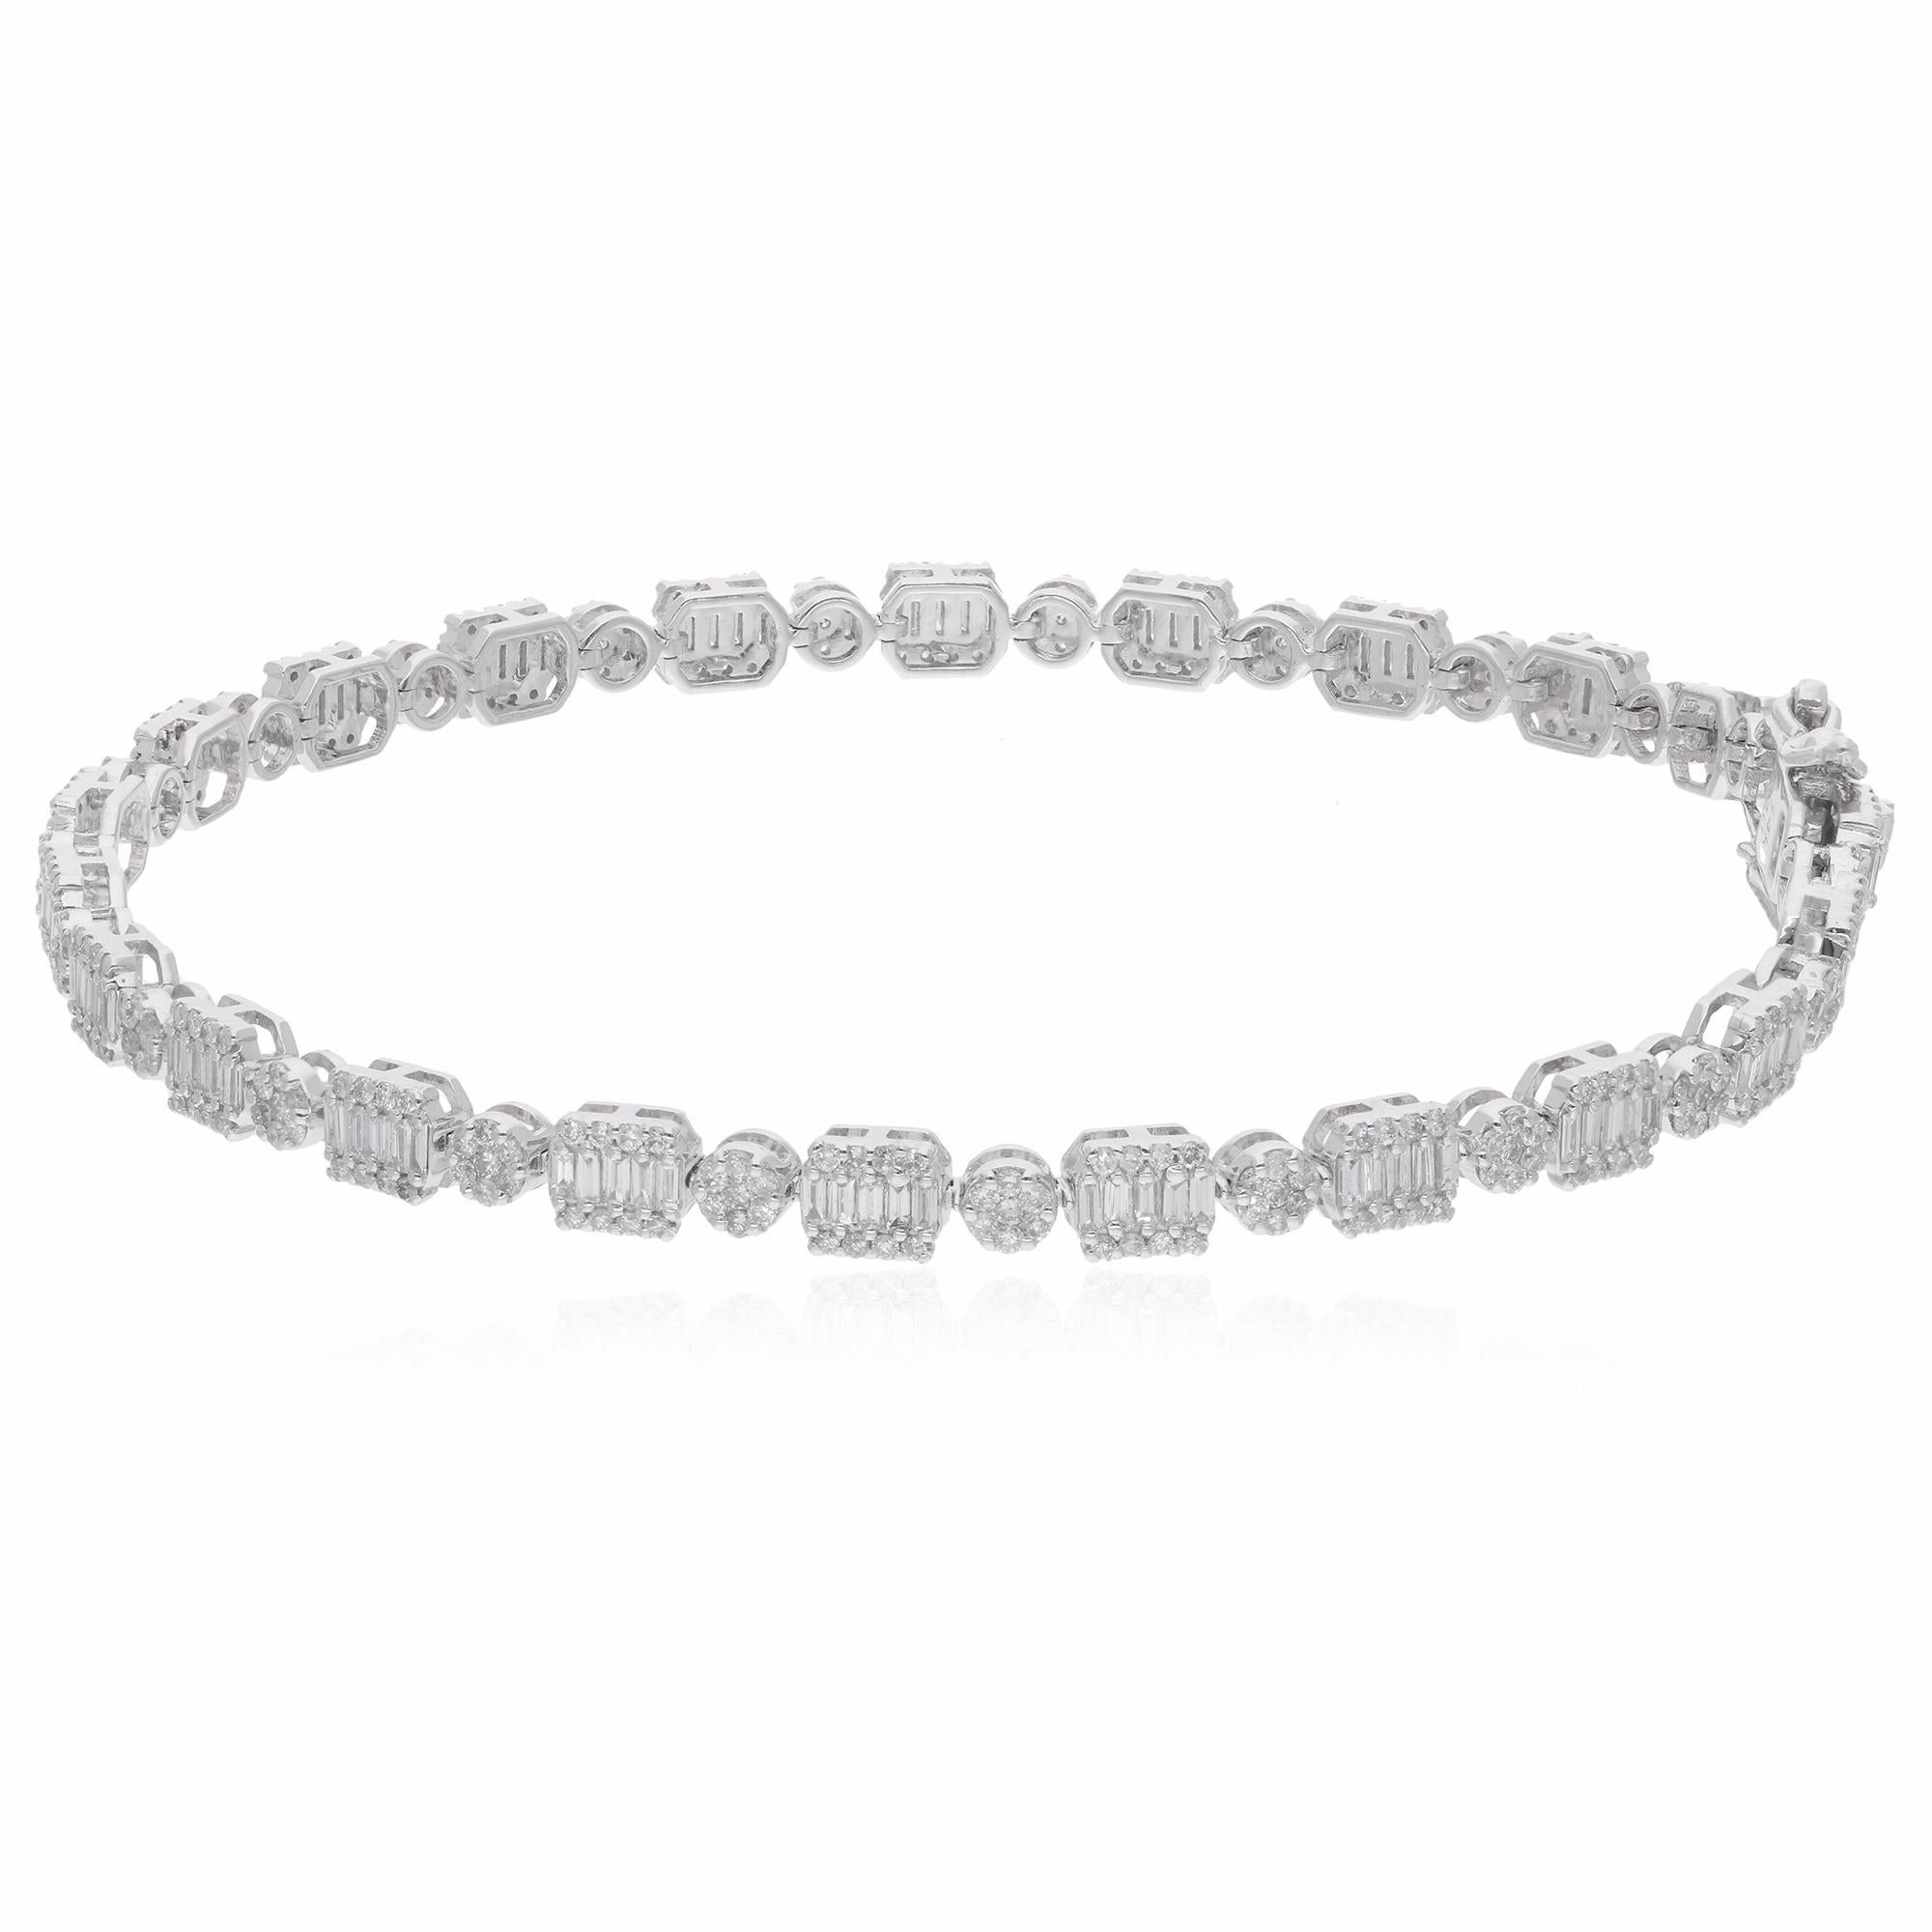 The baguette-cut diamonds are elegantly arranged in charming charms that dangle delicately from the bracelet, adding a touch of whimsy and allure to the design. The sleek lines and geometric shapes of the baguette-cut diamonds create a contemporary